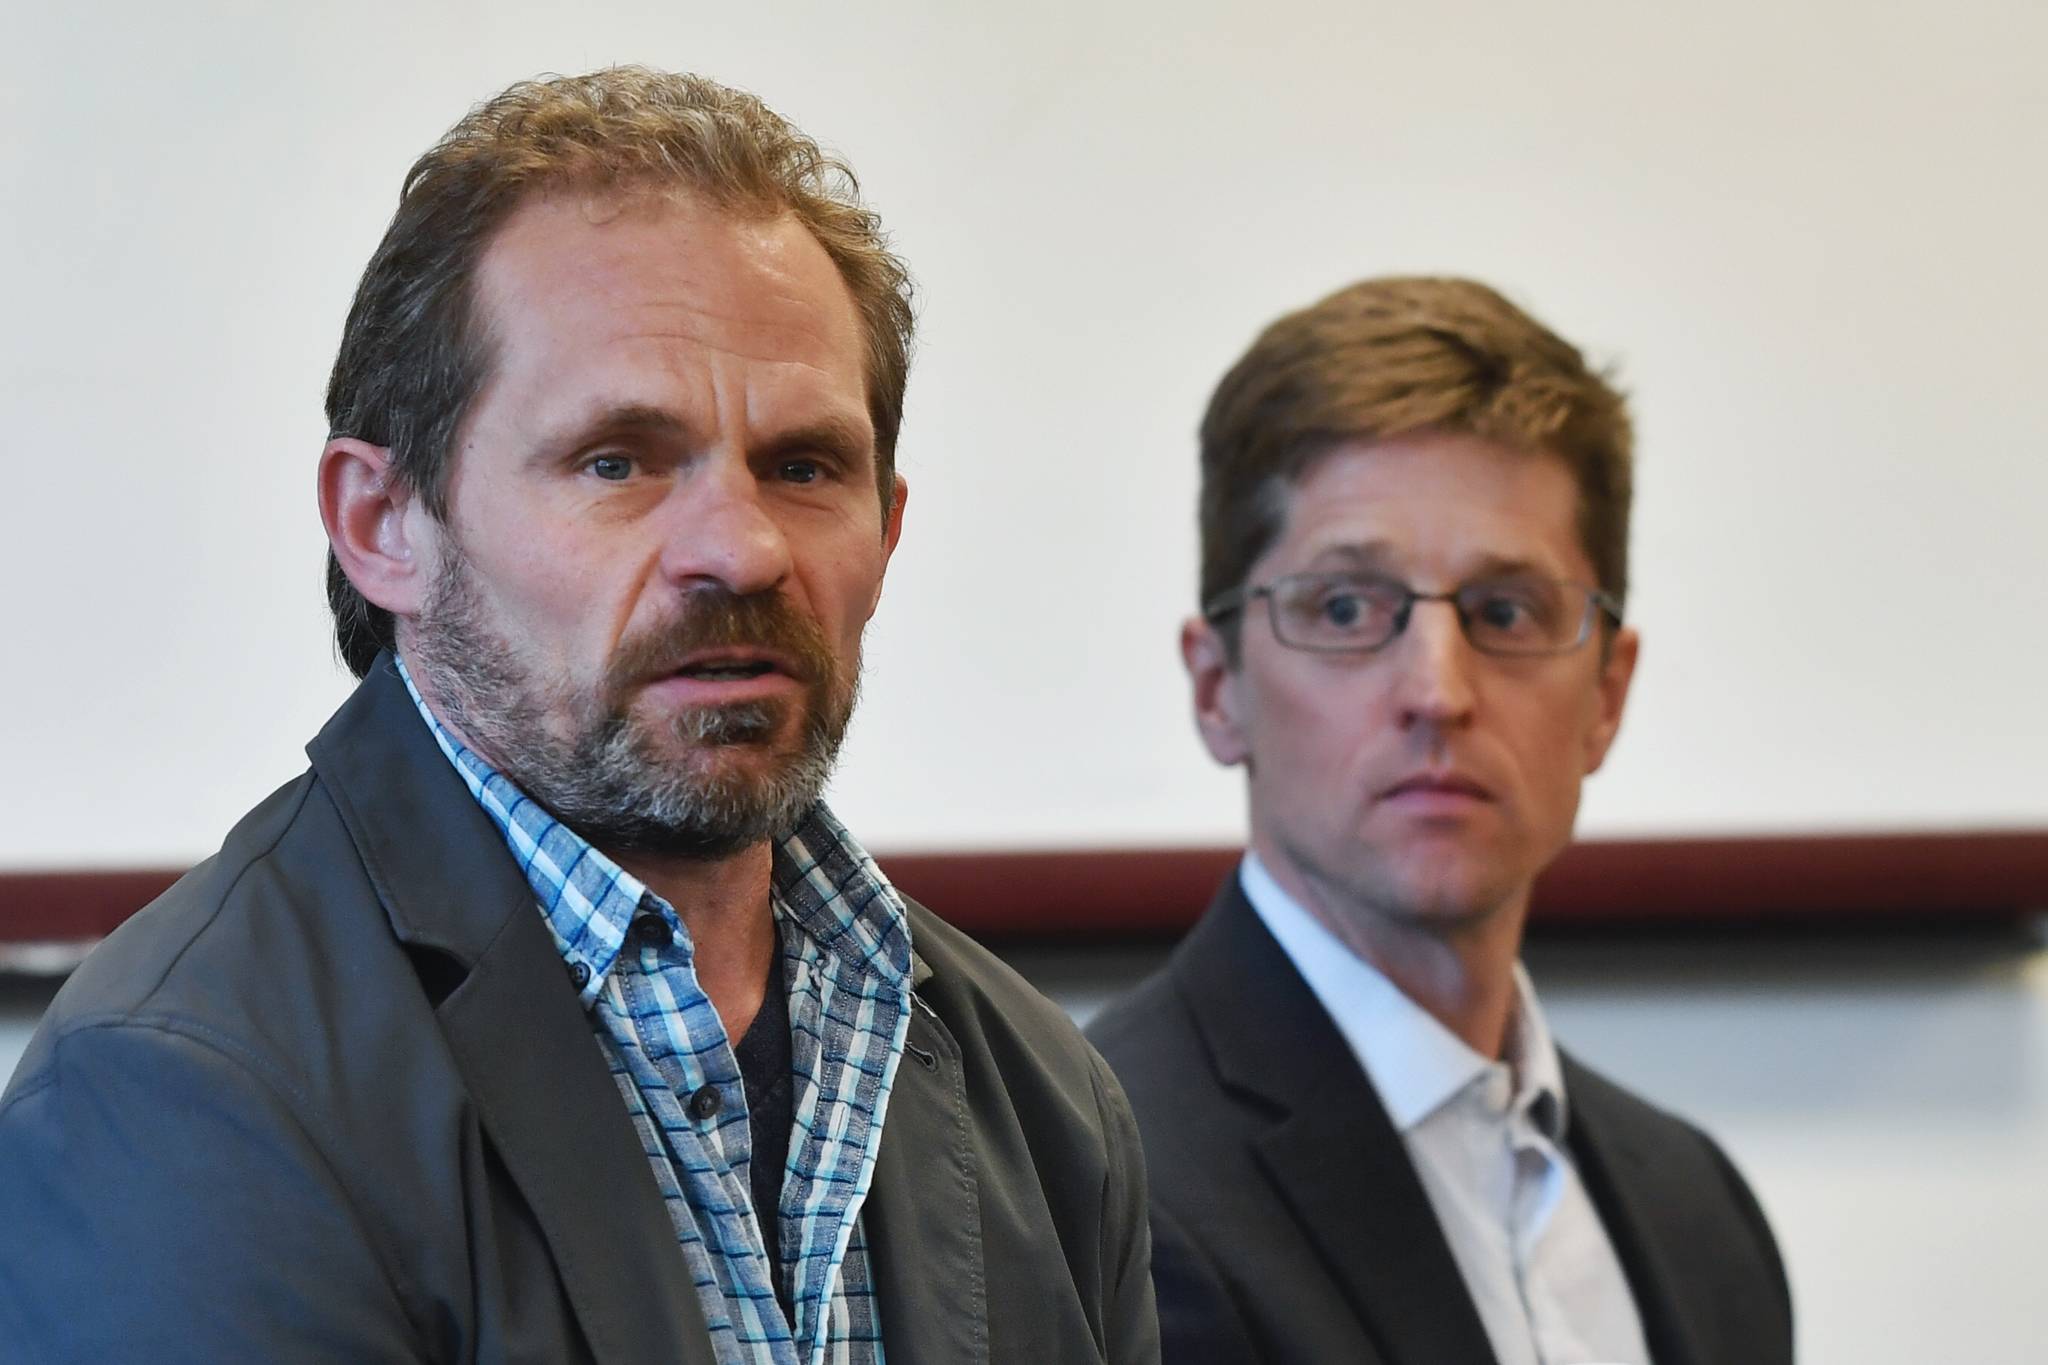 Dr. Daniel Schindler, a professor in the School of Aquatic and Fishery Sciences at the University of Washington, left, and Dr. Cameron Wobus, a Senior Scientist at Lynker Technologies, present at a press conference against thePebble Mine project on Monday, April 1, 2019. (Michael Penn | Juneau Empire)